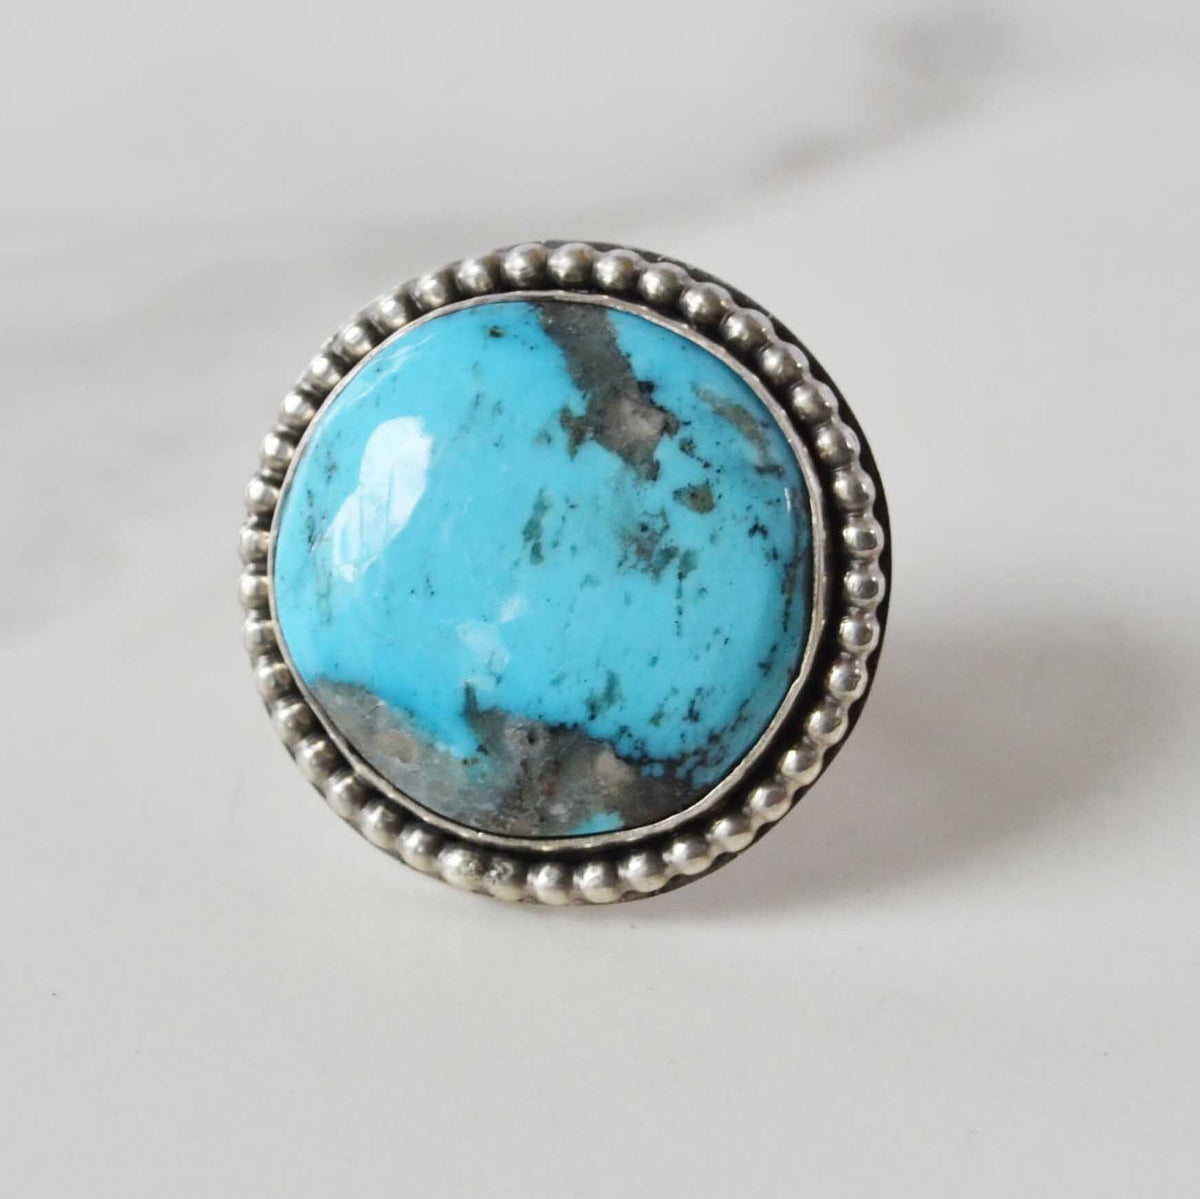 Arizona Kingman Turquoise Sterling Silver Ring, One of a Kind